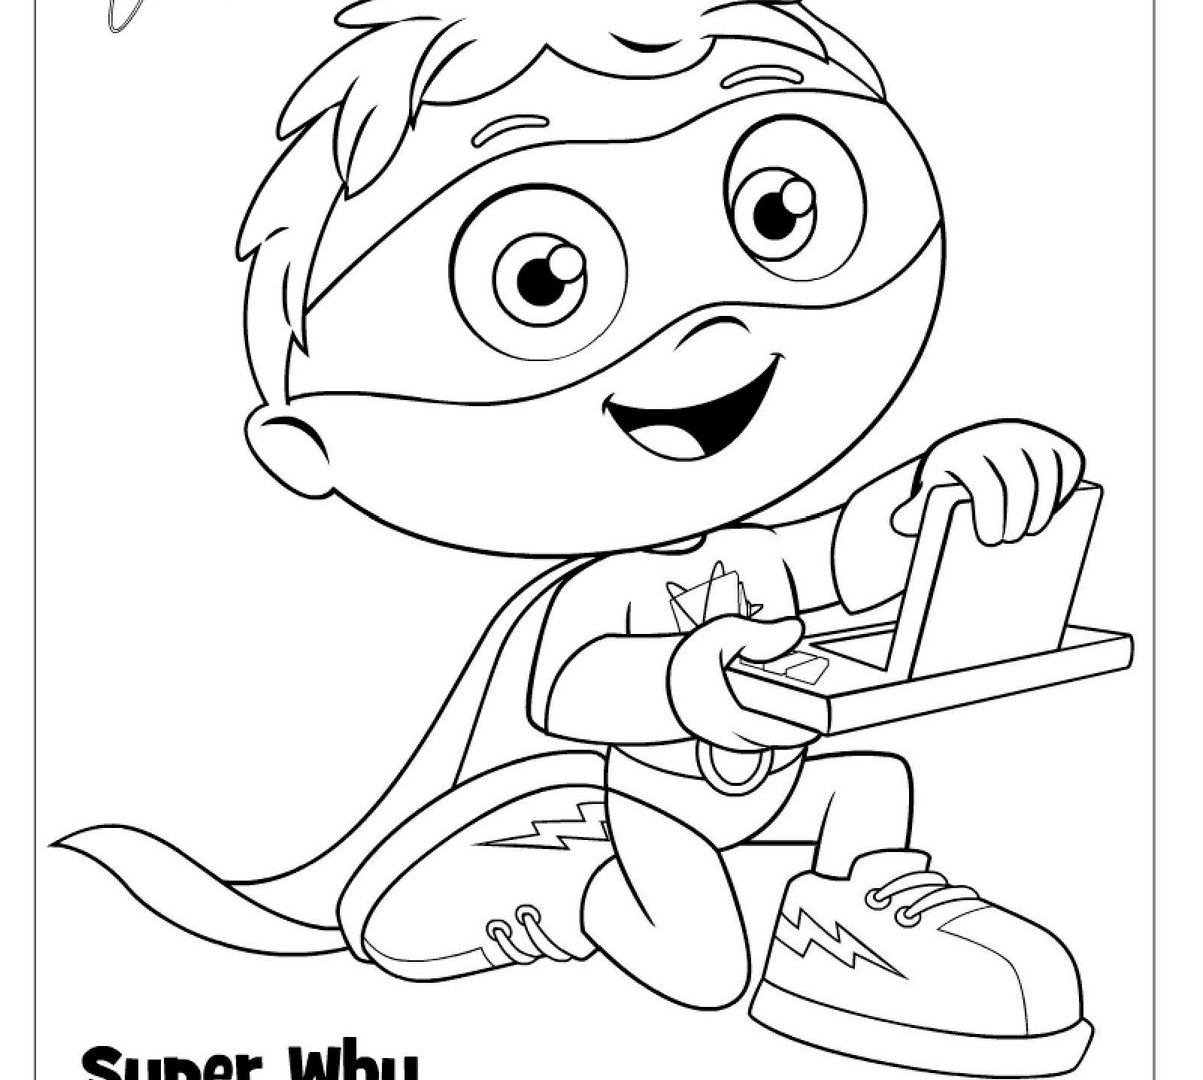 Super Why Printable Coloring Pages at Free printable